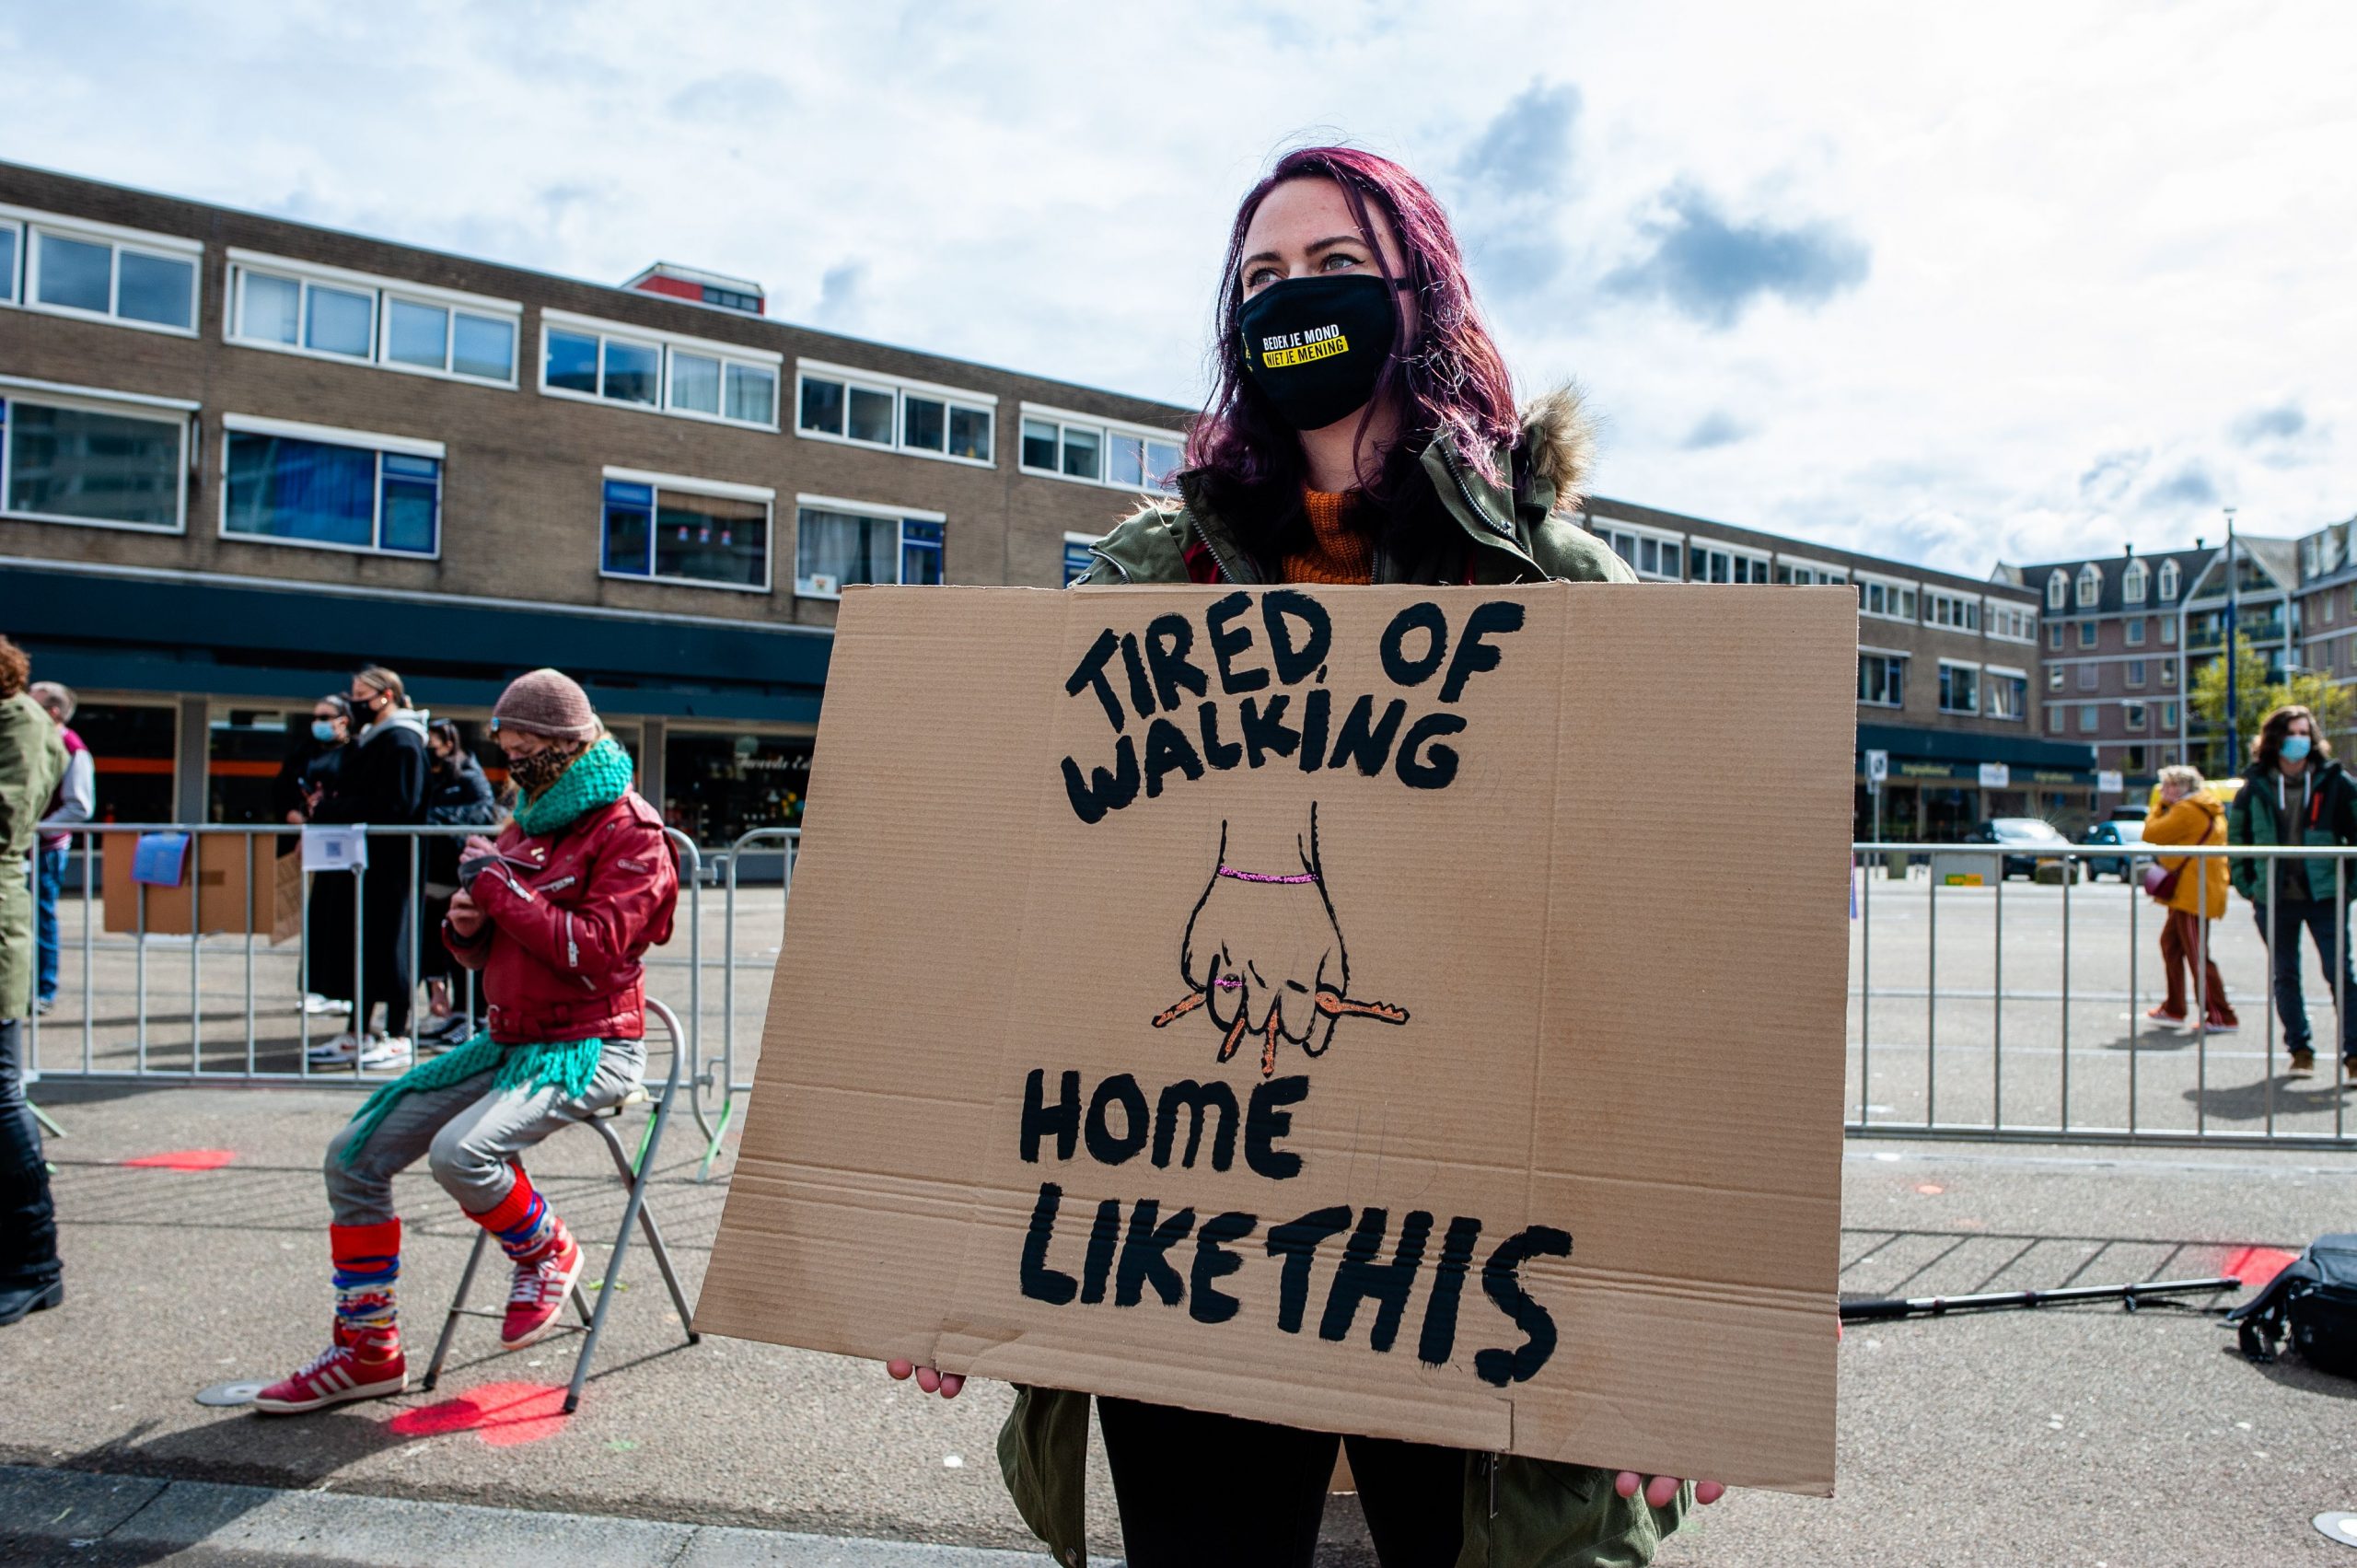 Protest sign reading "Tired of walking home like this" with a picture of a hand holding keys for protection.